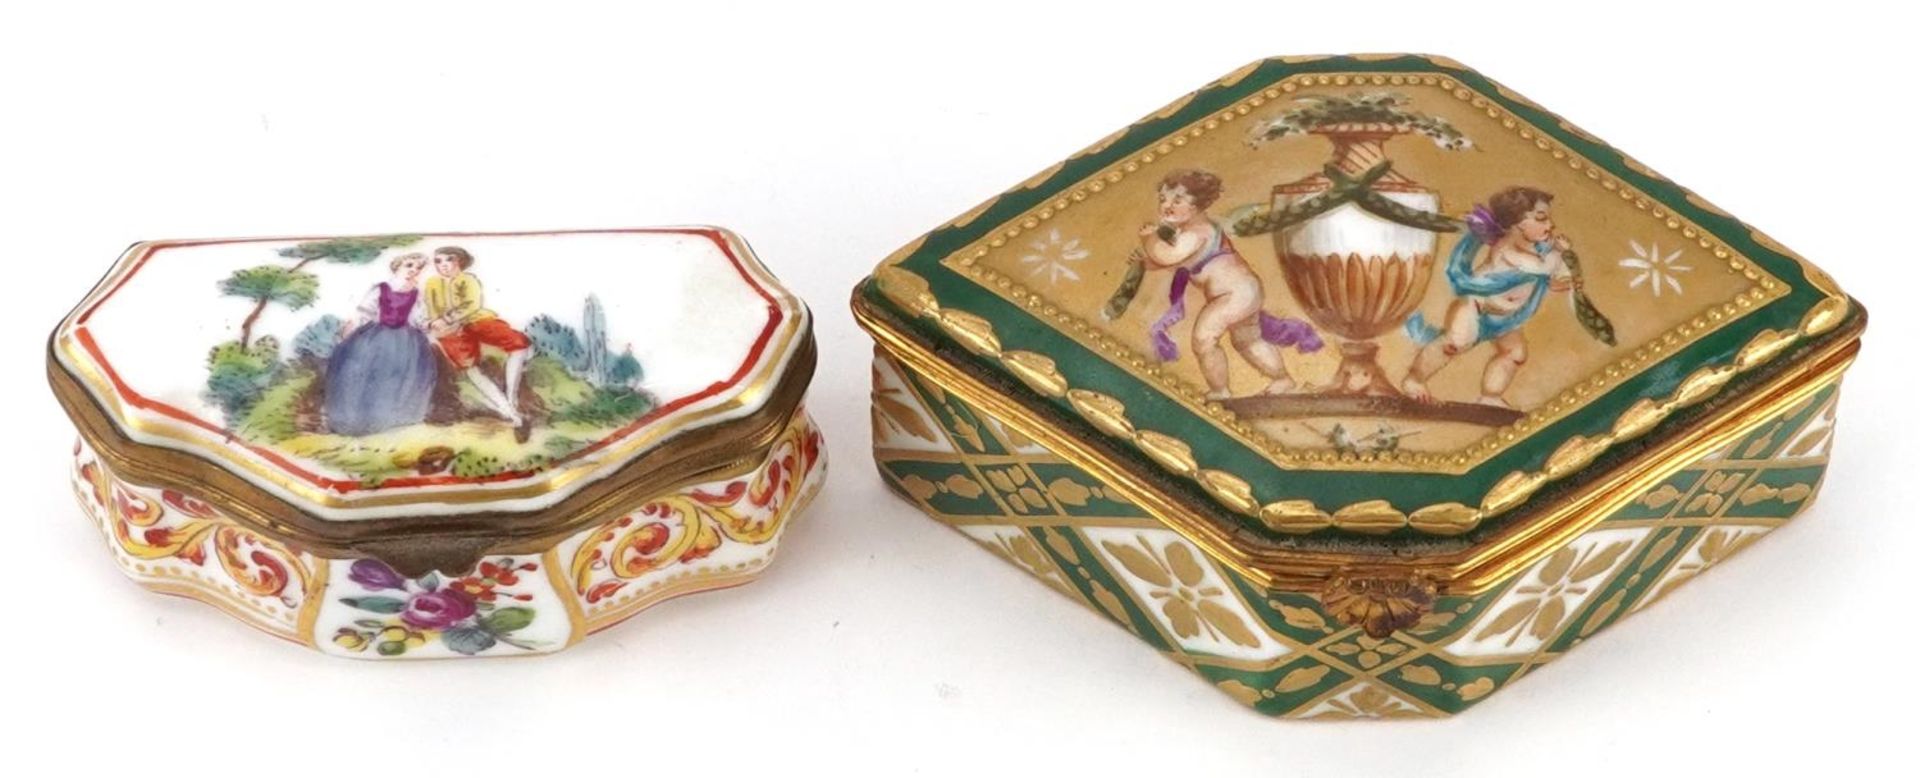 Two 19th century European snuff boxes including a Sevres example in the form of a diamond hand - Bild 2 aus 4